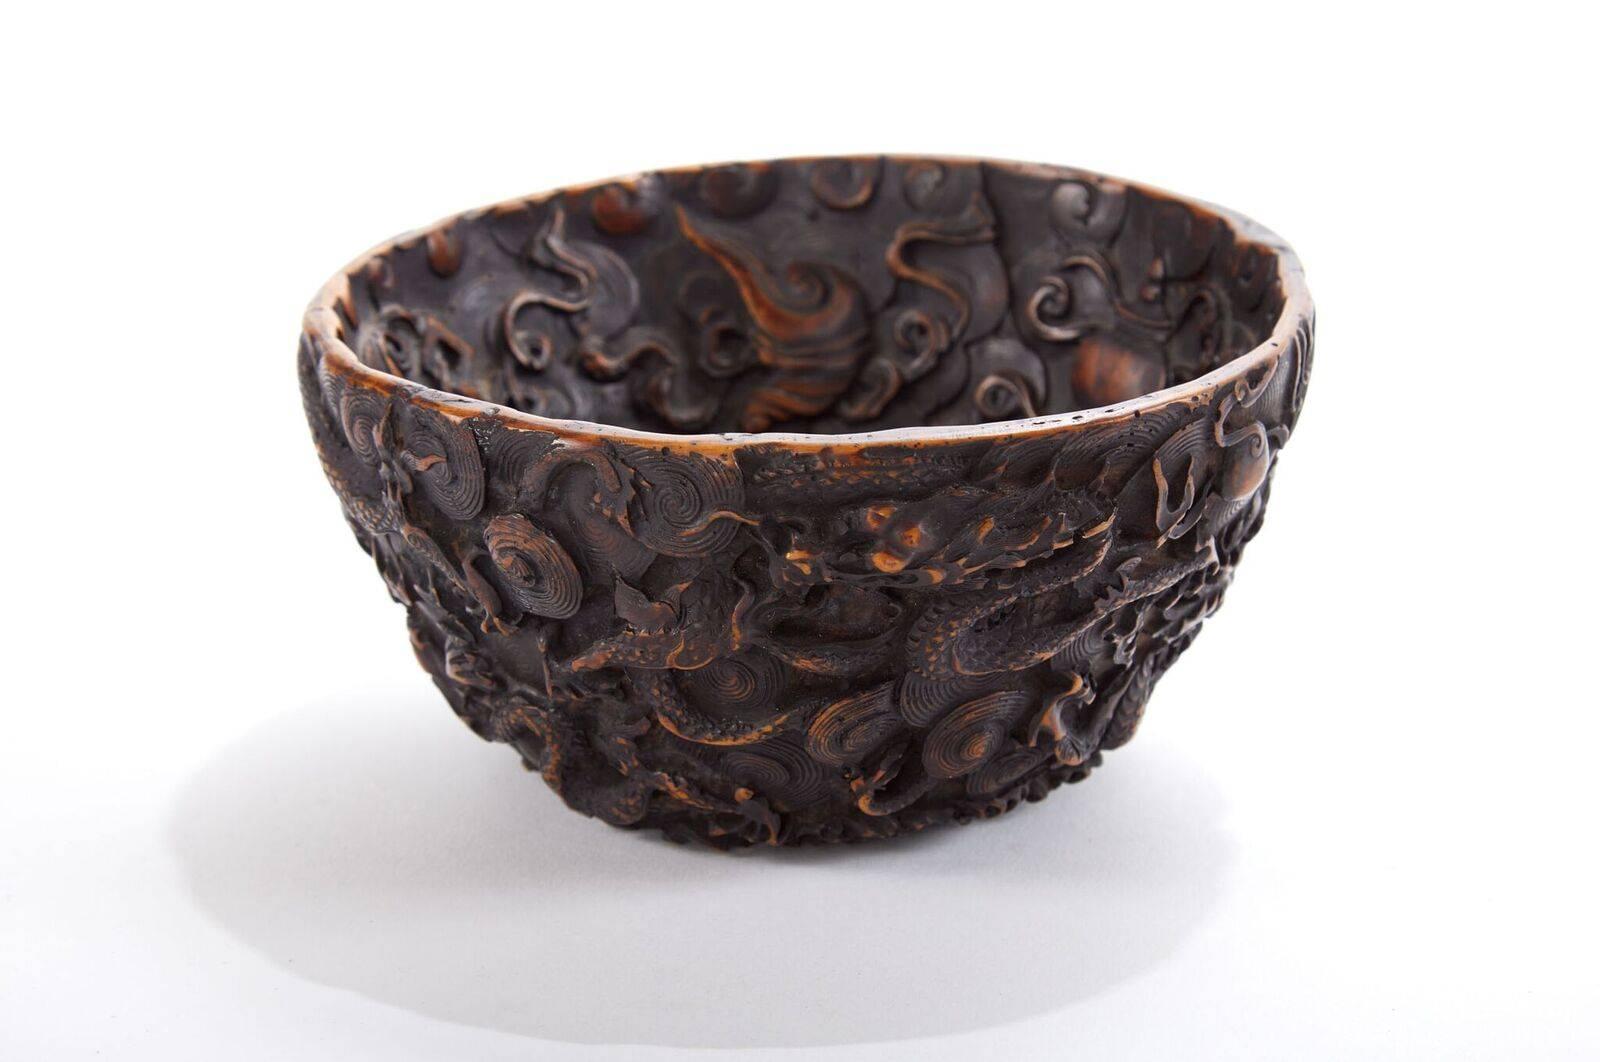 Hand-Carved 19th Century Black Forest 'German' Carved Bowl